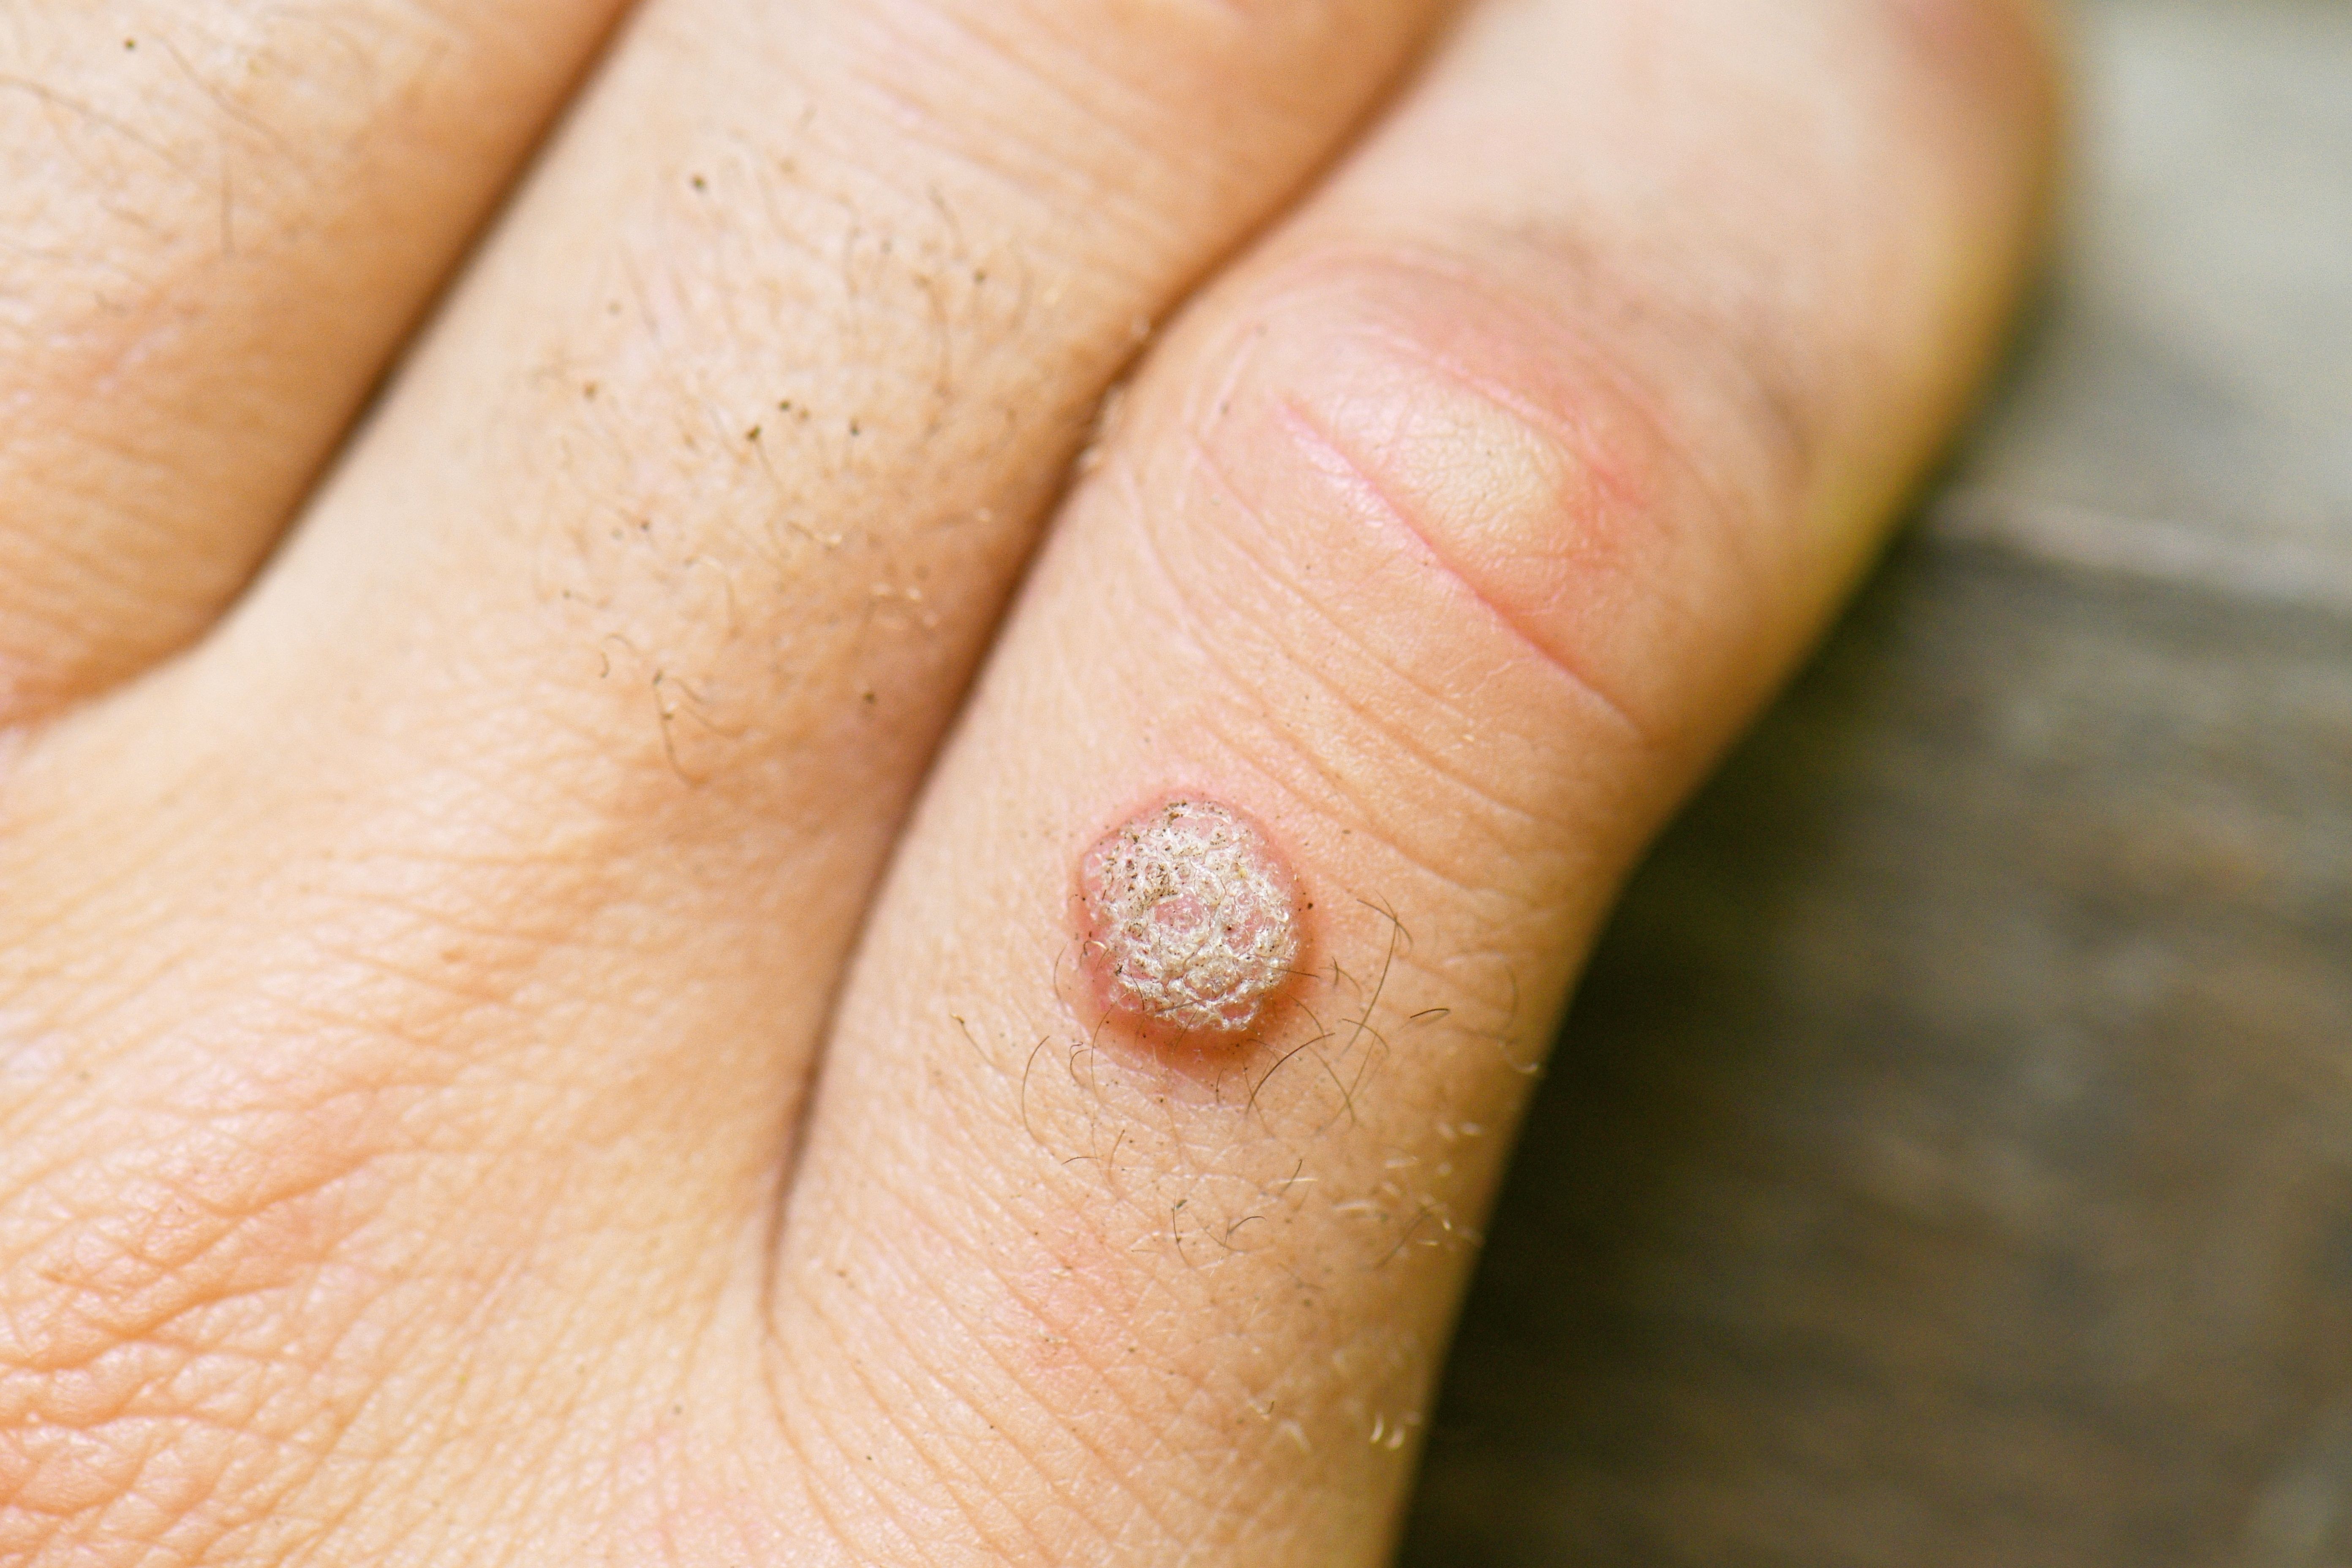 Warts cancer treatment. New systemic treatments in HPV infection